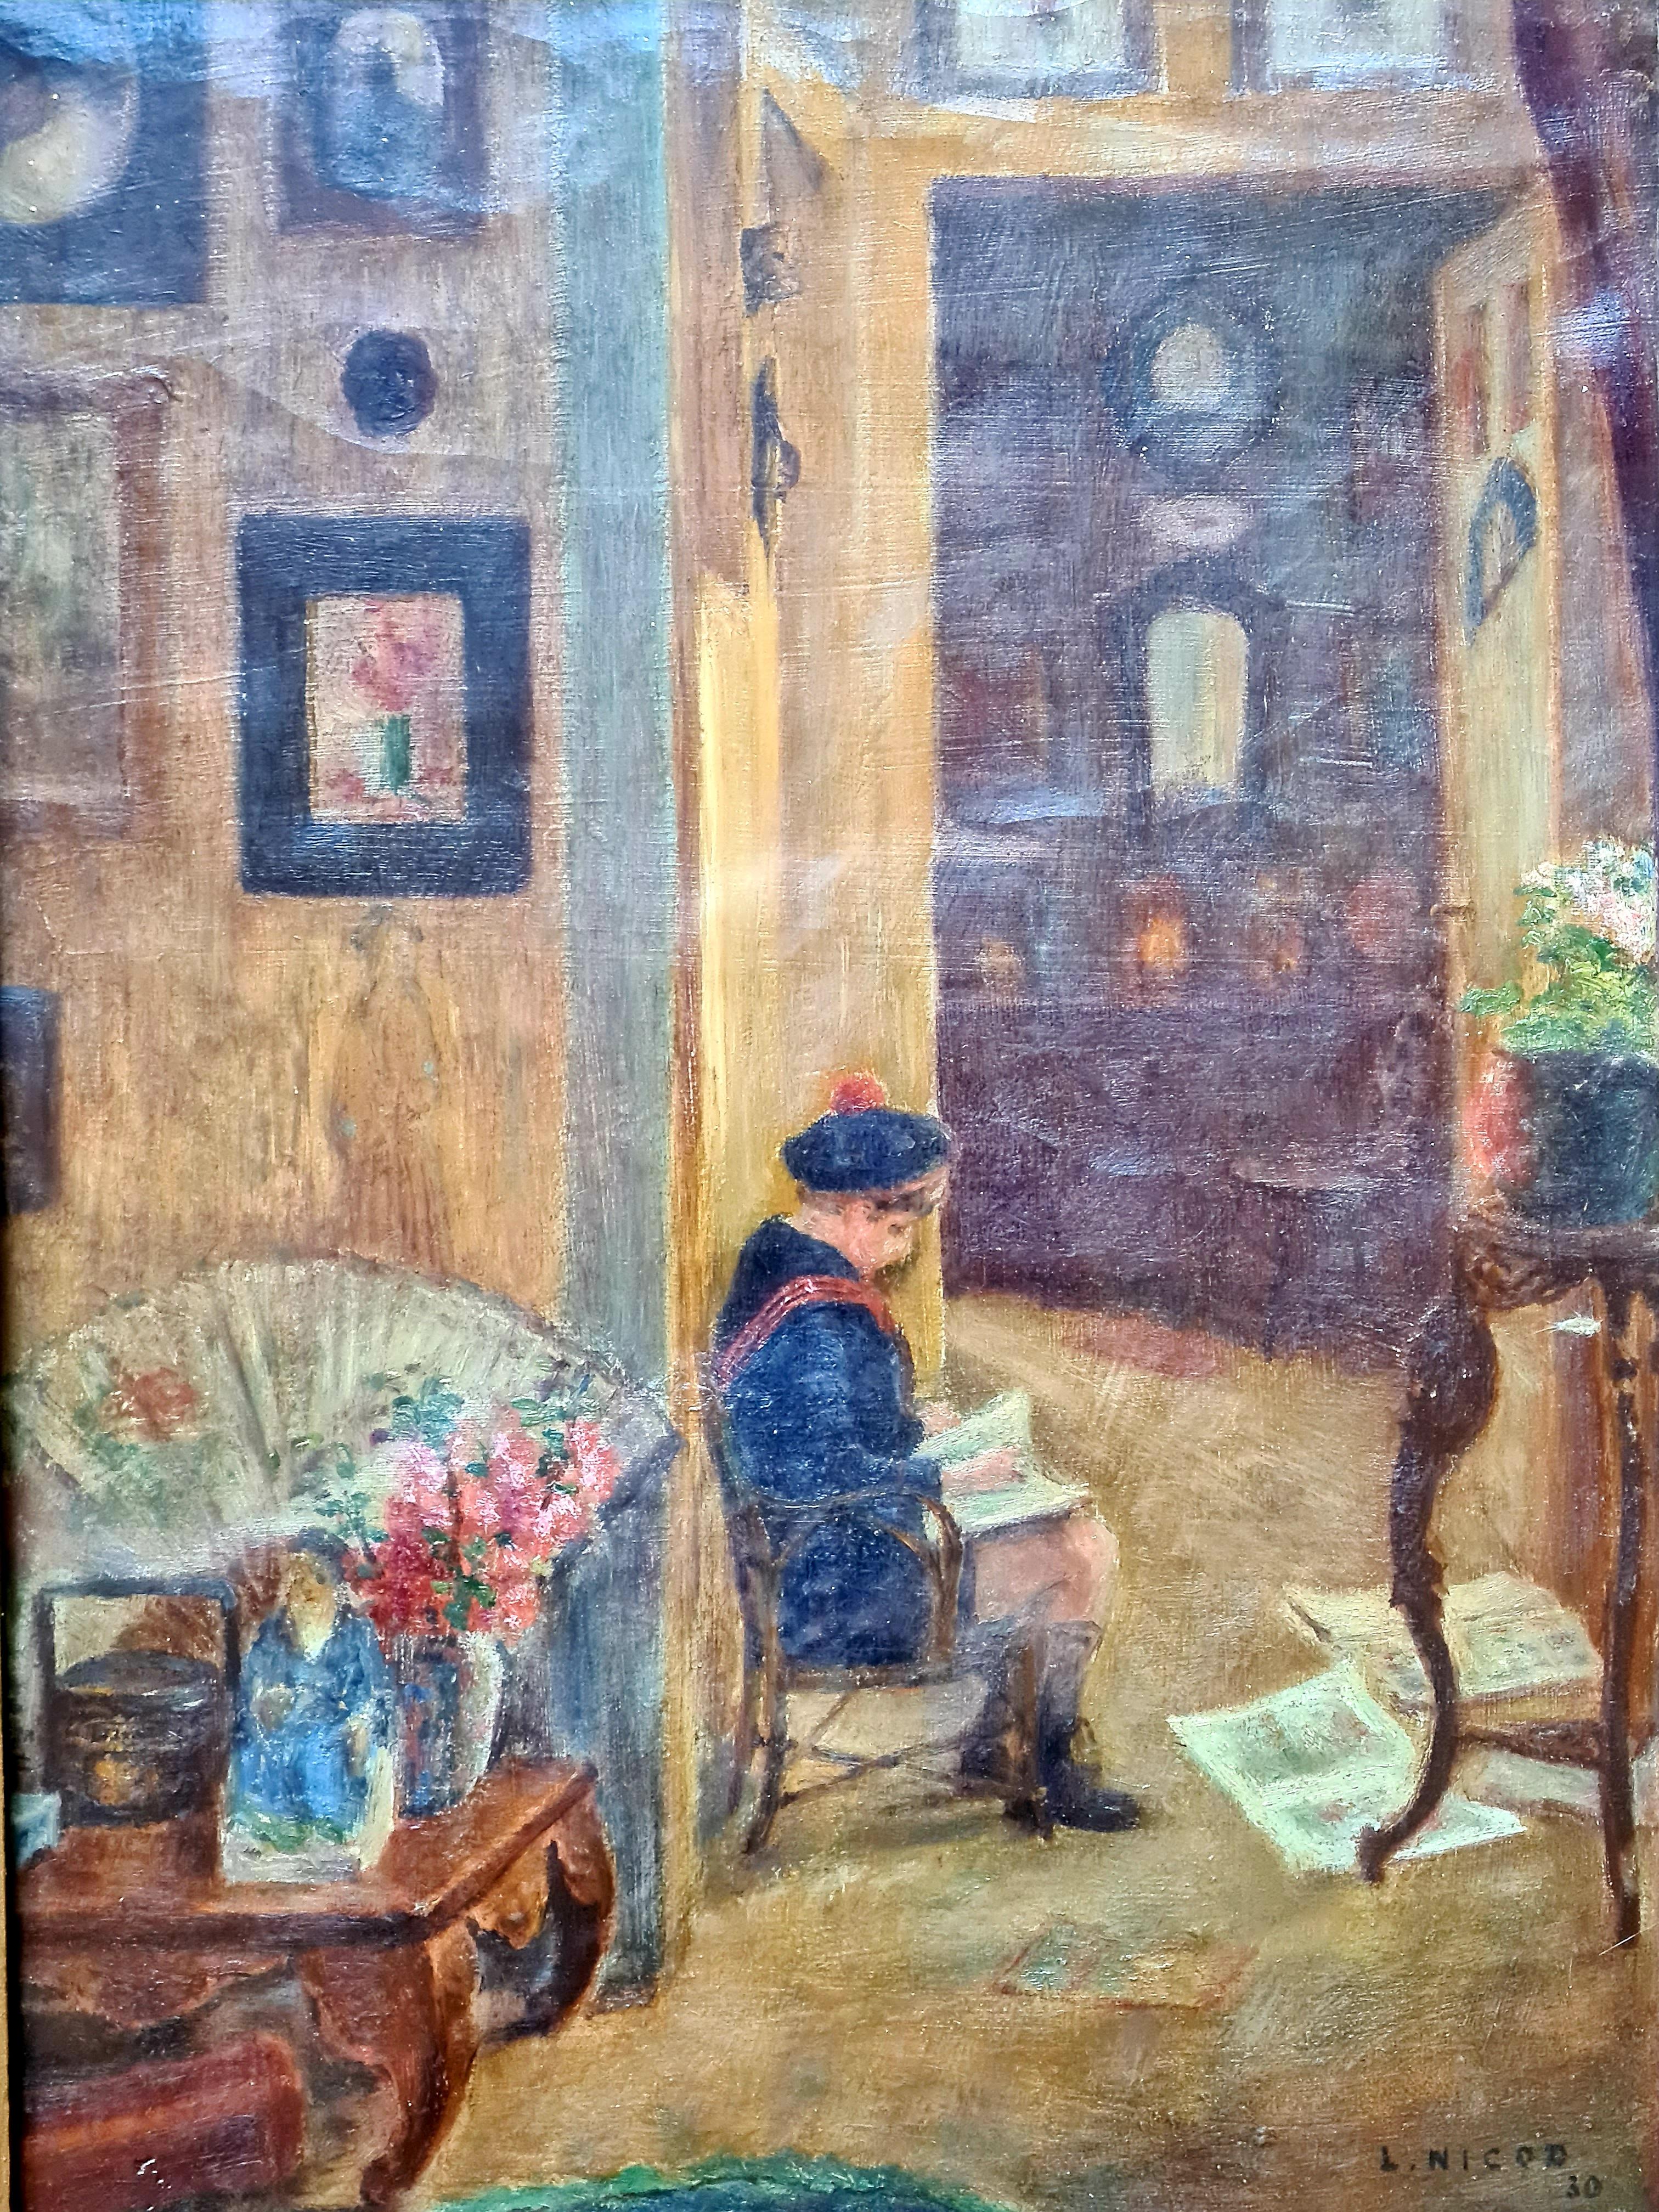 The Young Artist, Early 20th Century French Interior View, Chateau Vesoul - Romantic Painting by L Nicod